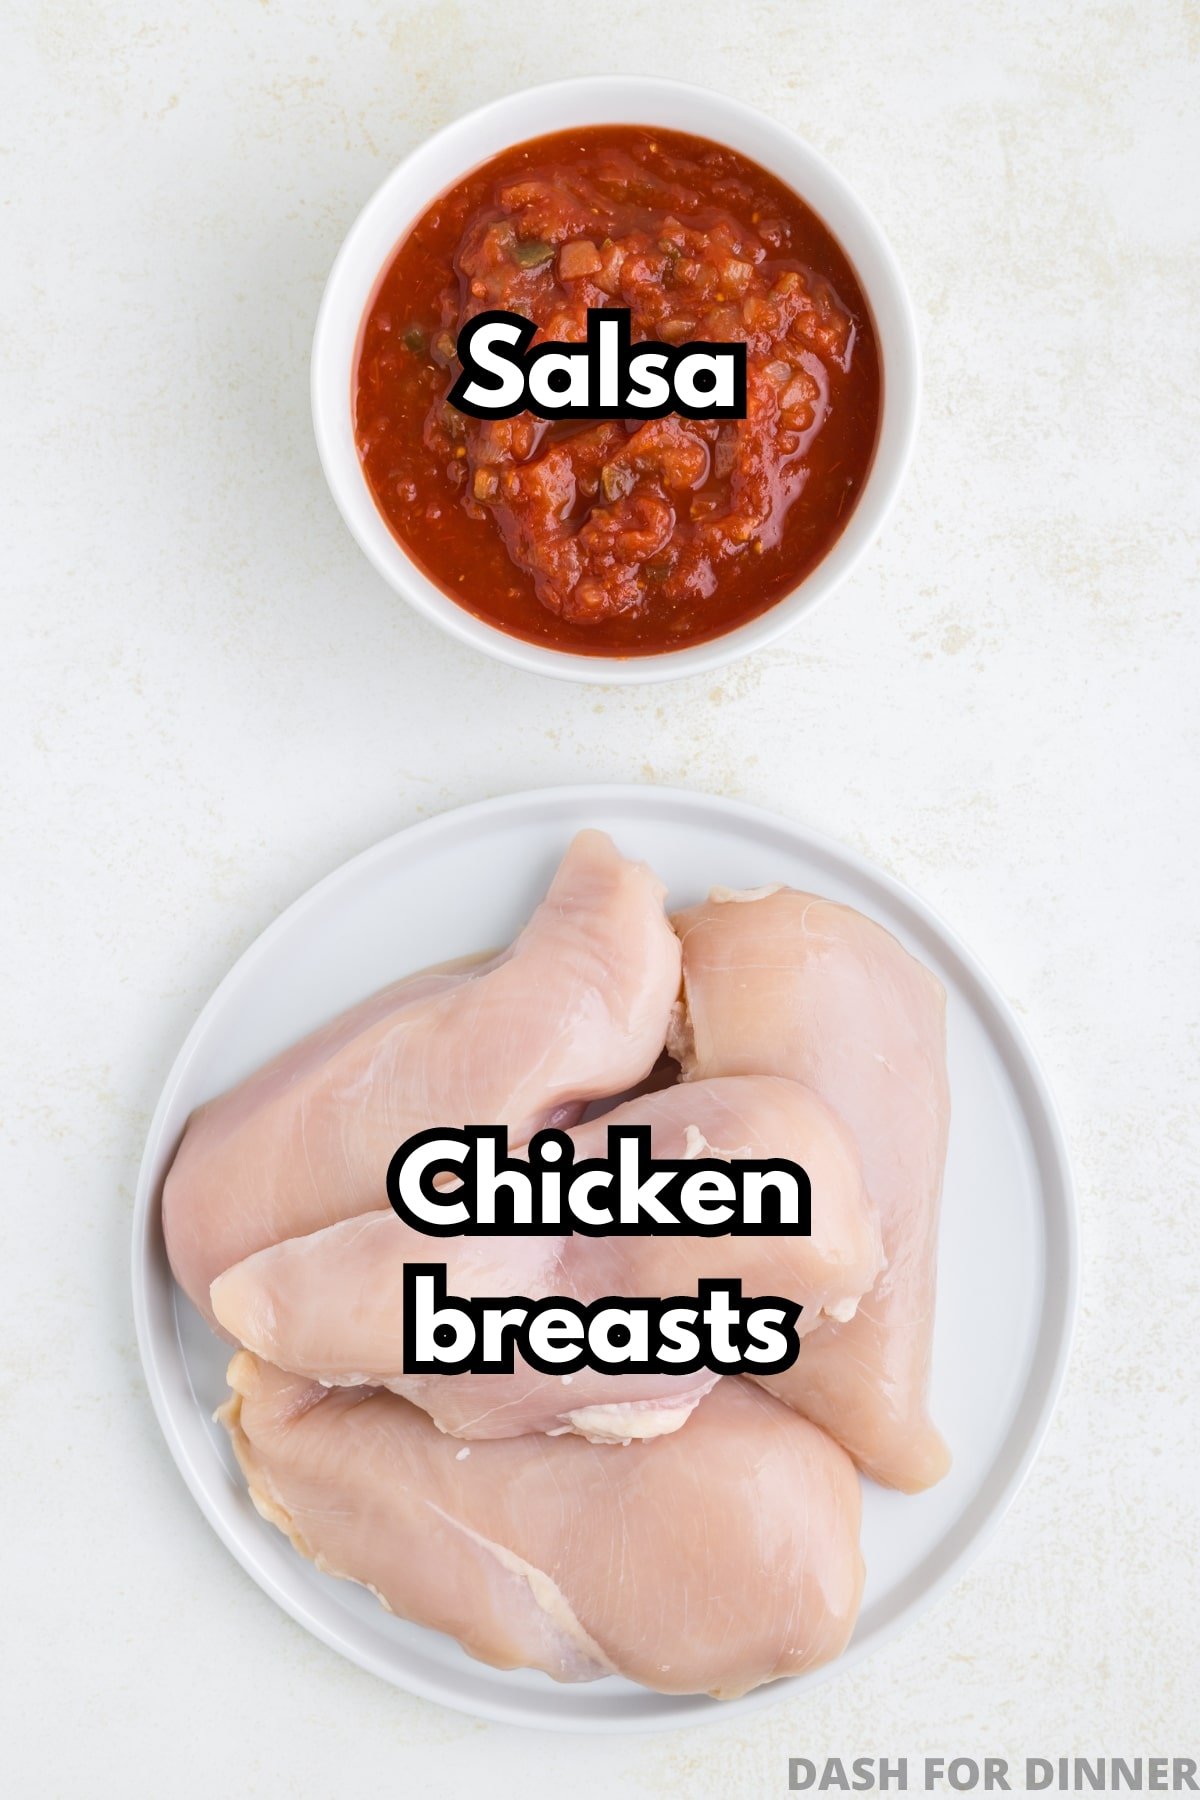 A plate of chicken breasts, with a bowl of salsa on a white background.